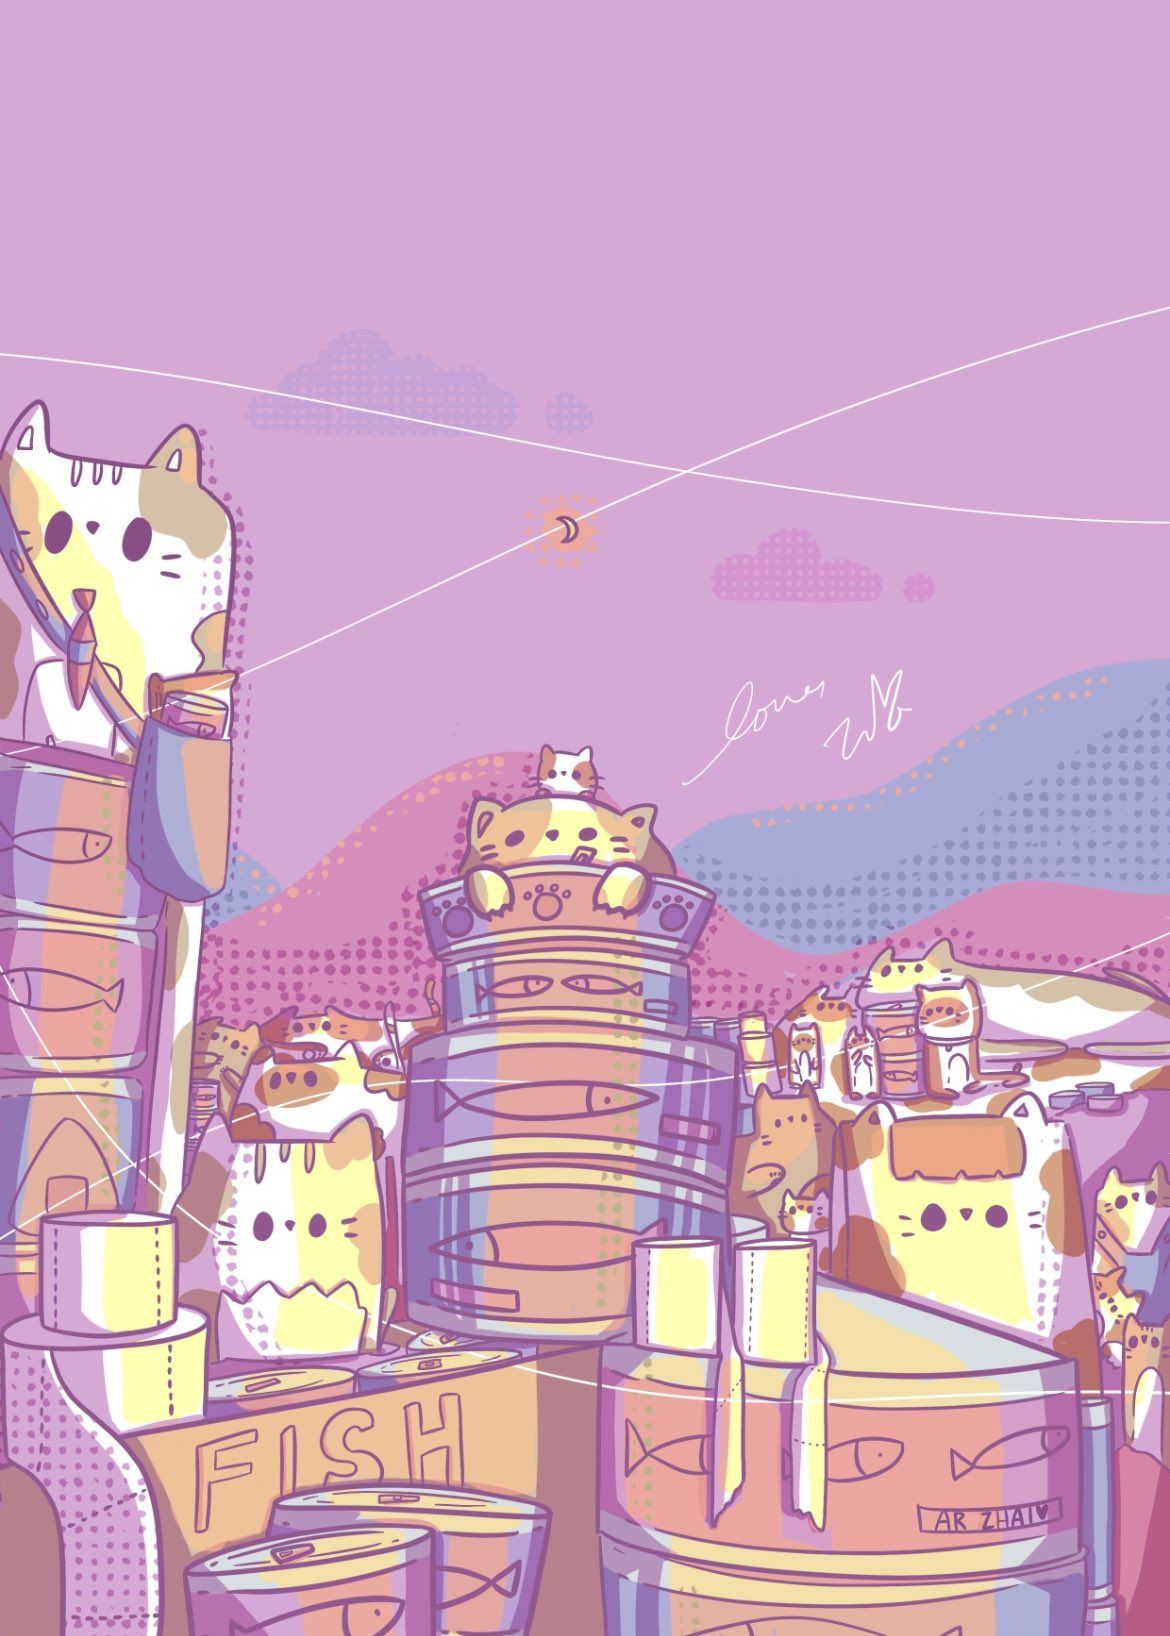 Illustration of cats in boxes on a purple background - Fish, doodles